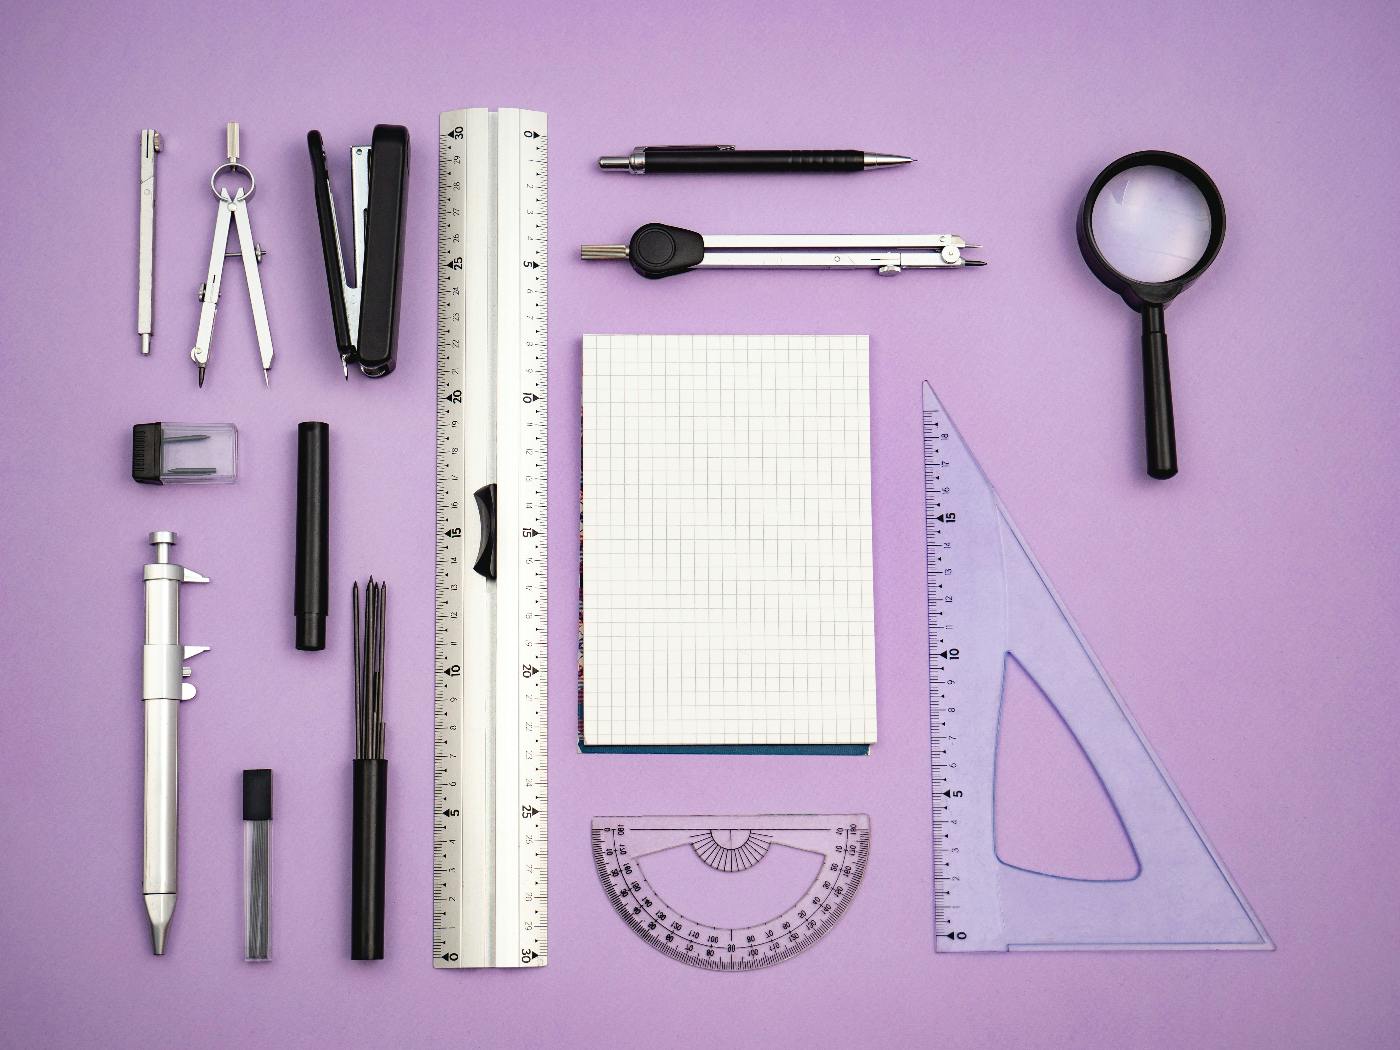 Design tools neatly displayed on a purple backdrop